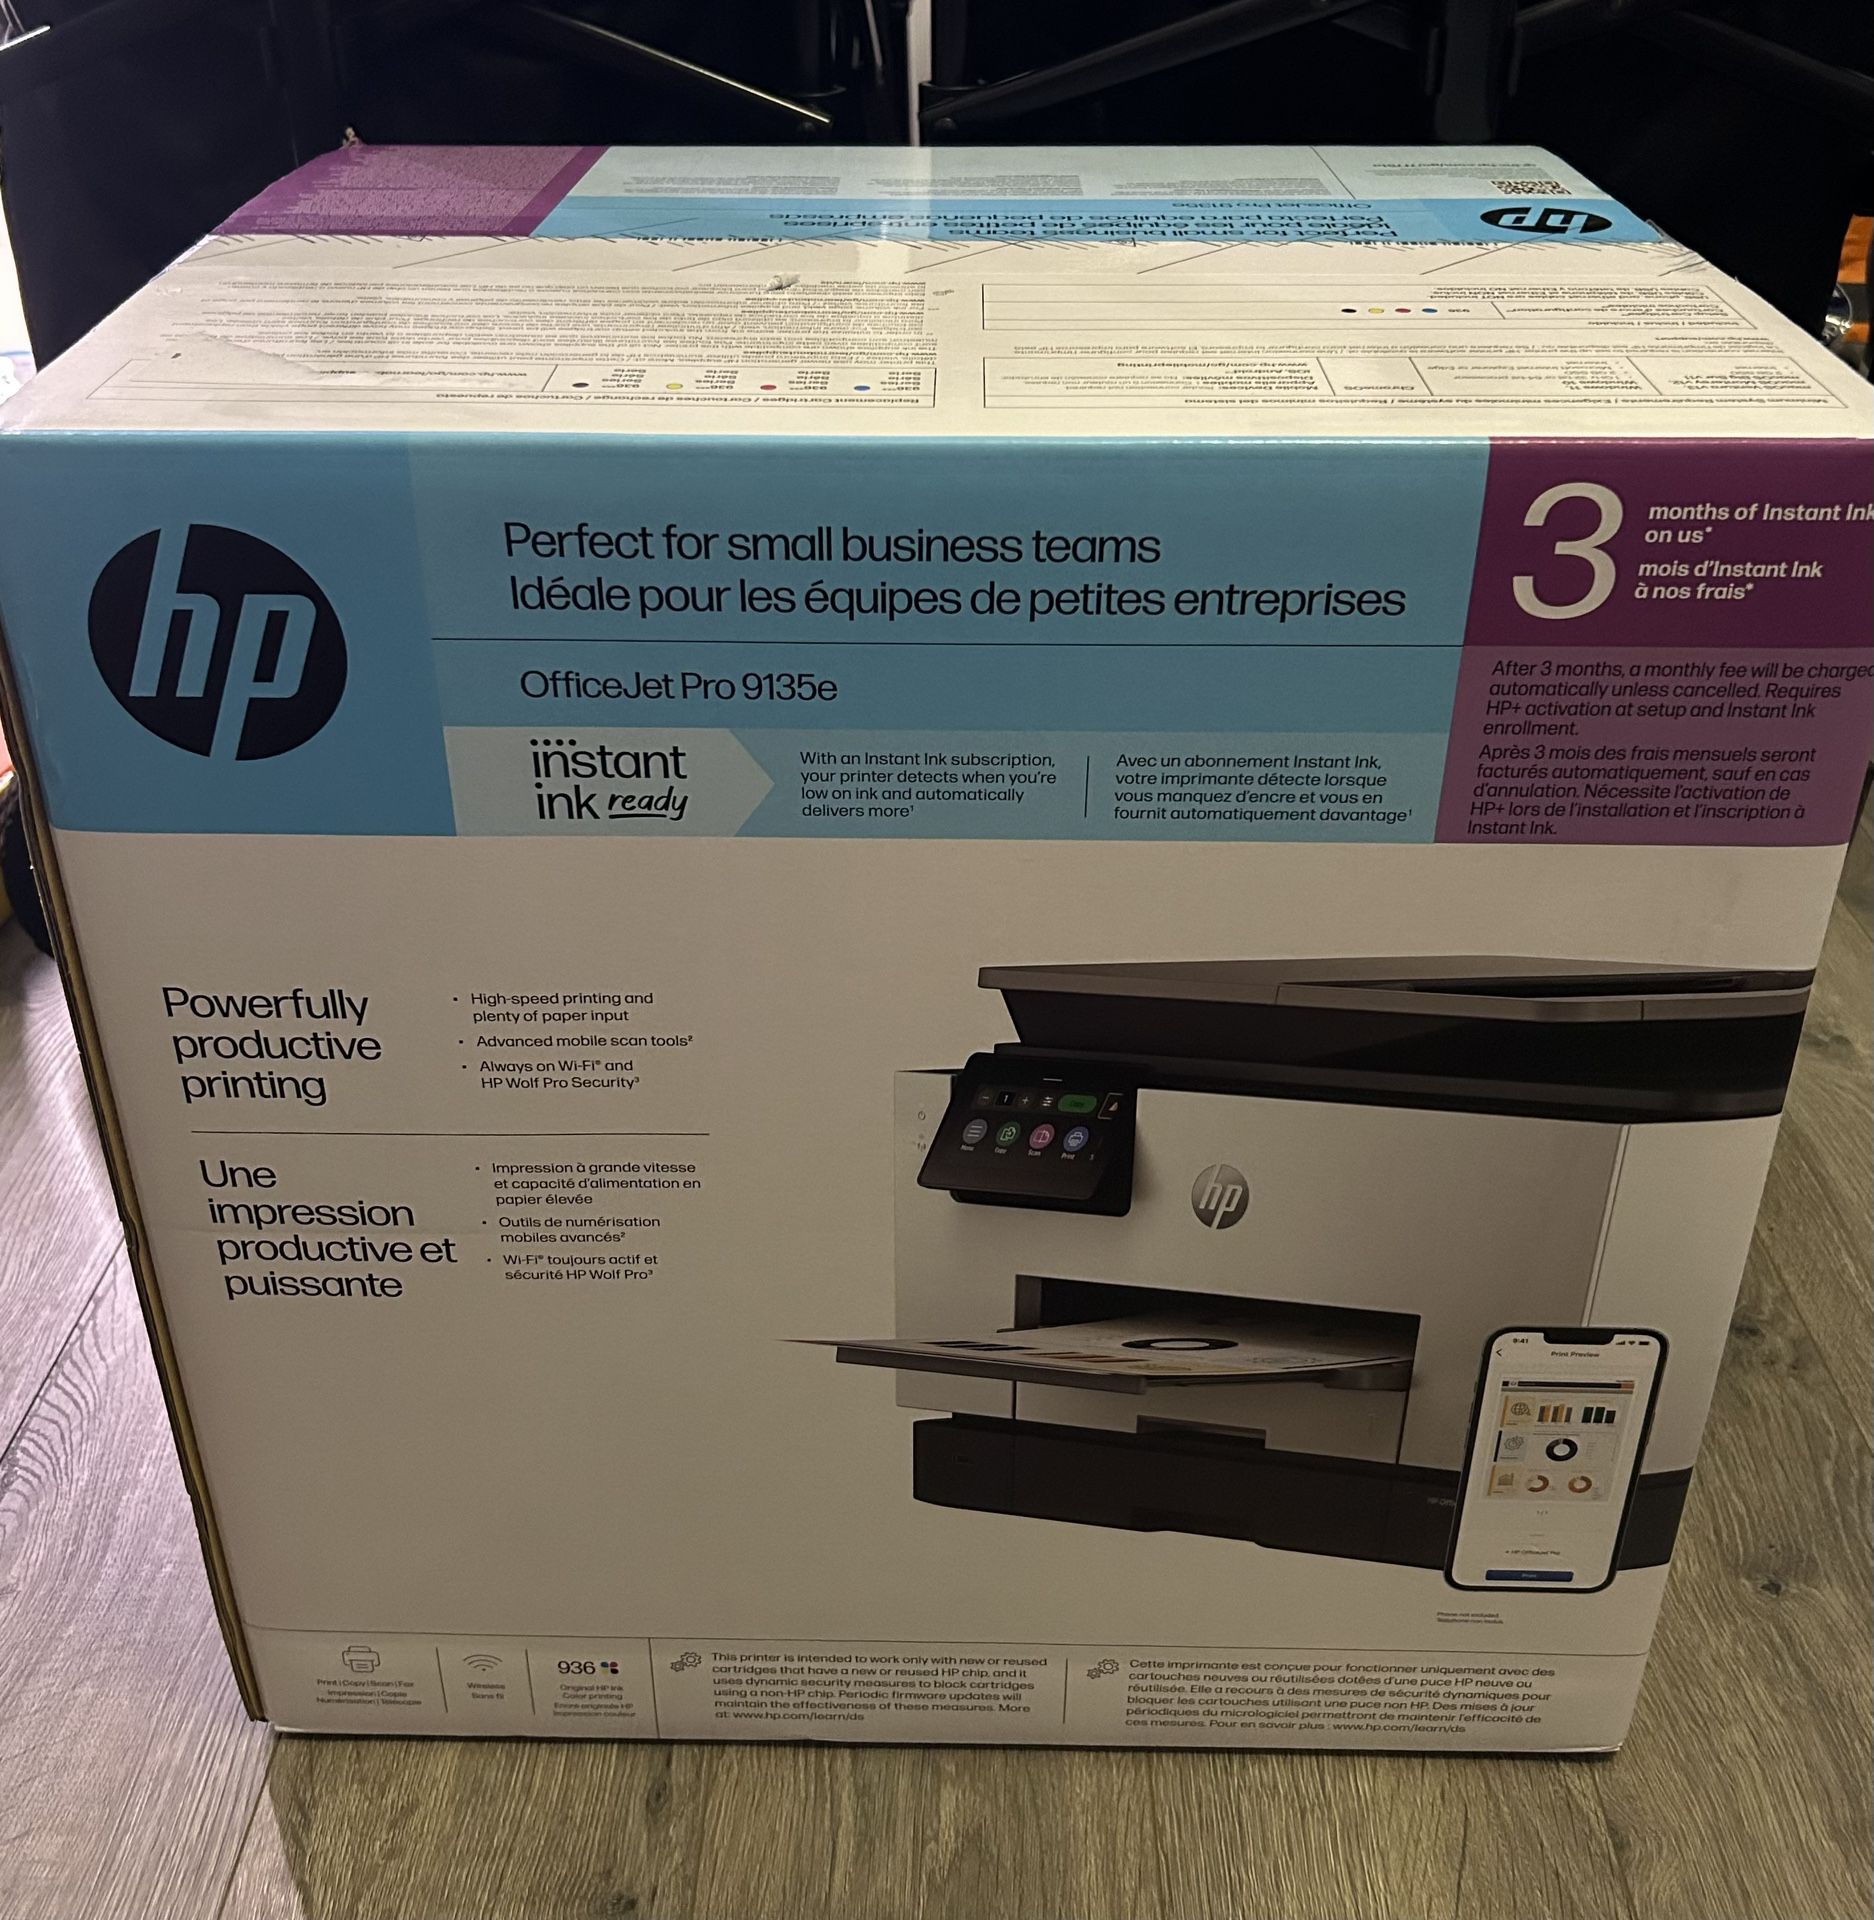 HP OfficeJet Pro 9135e All-in-One Printer, Color, Printer-for-Small Medium Business, Print, Copy, scan, fax, Wireless Instant Ink Eligible (3 months i